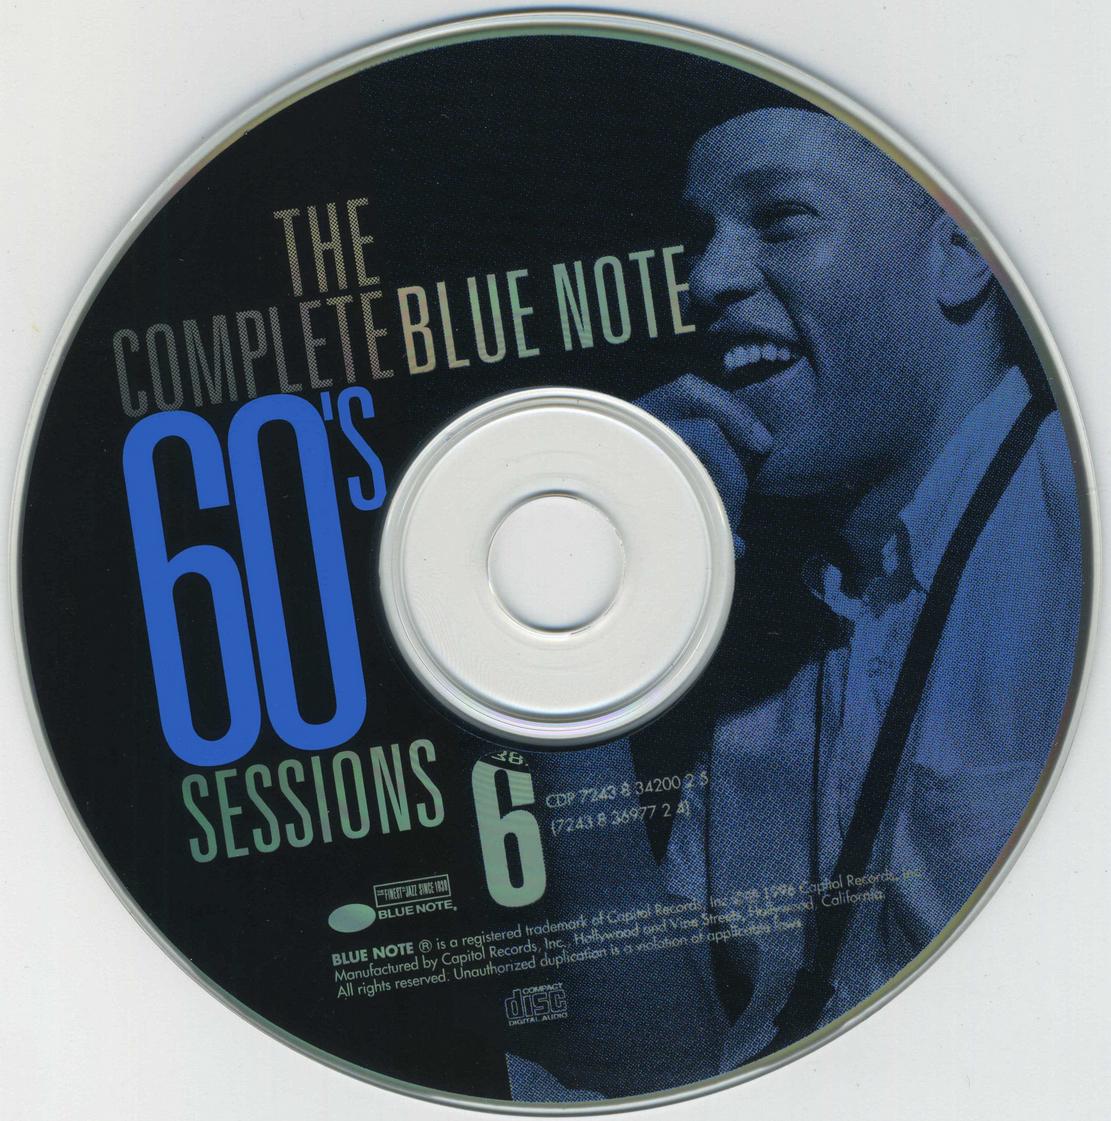 Dexter Gordon - The Complete Blue Note Sixties Sessions [6 CD Set] (1996) {Blue  Note} / AvaxHome